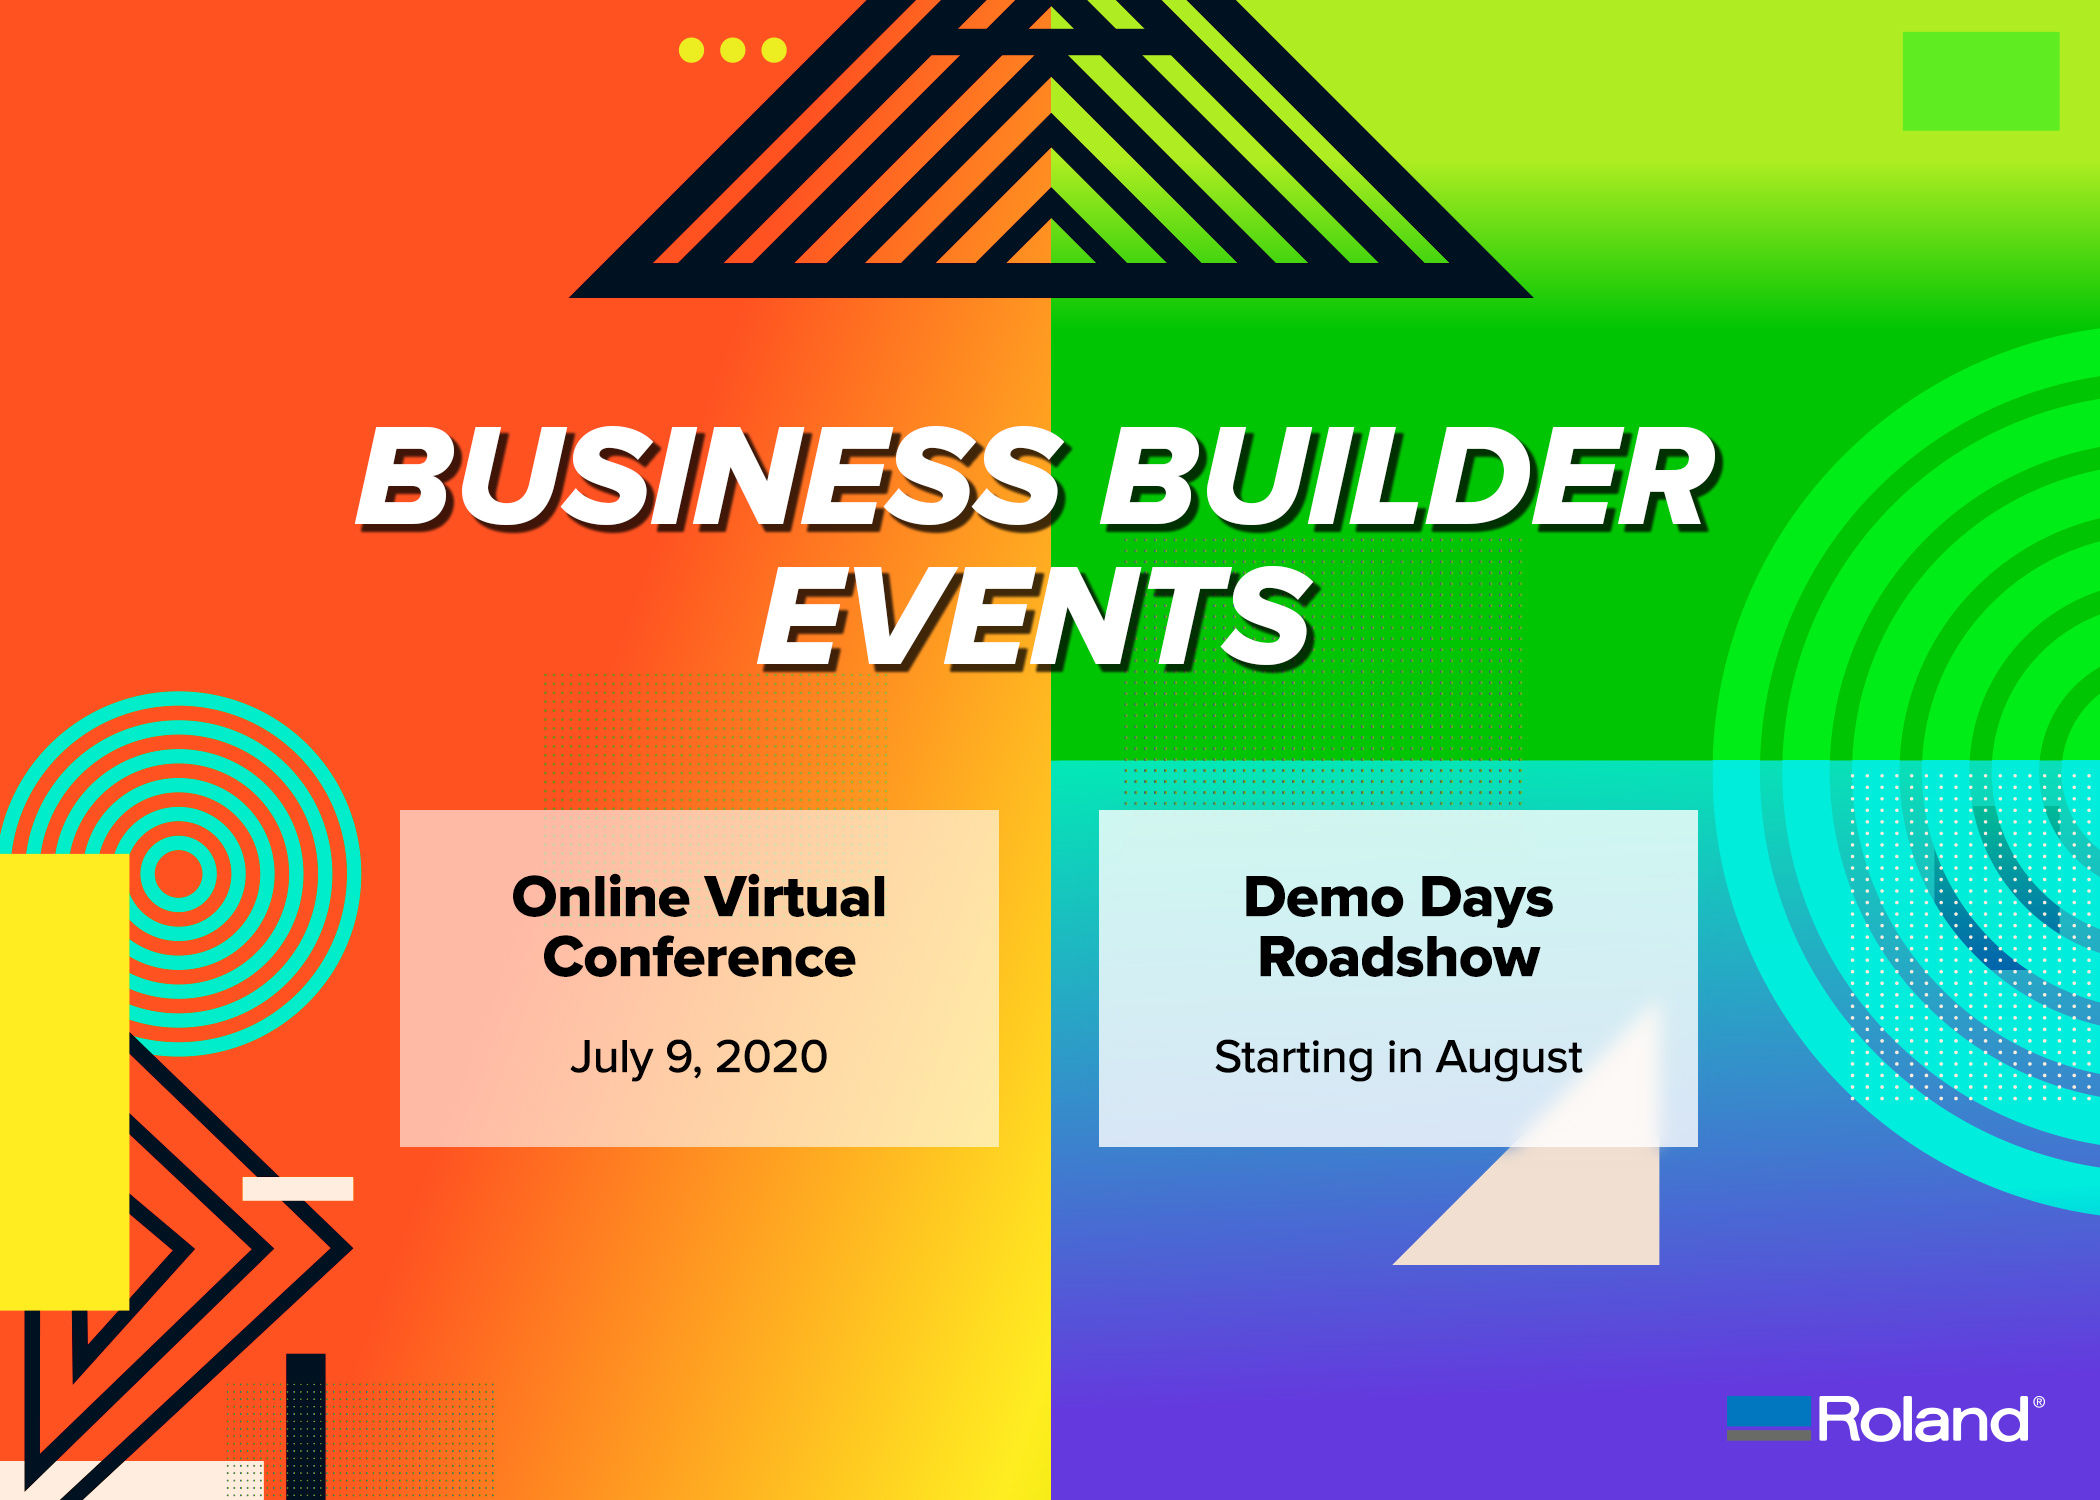 Roland DGA Announces "Business Builder" Event , Including Online Conferences and In-Person, Limited Attendance Demo Days Road Show.